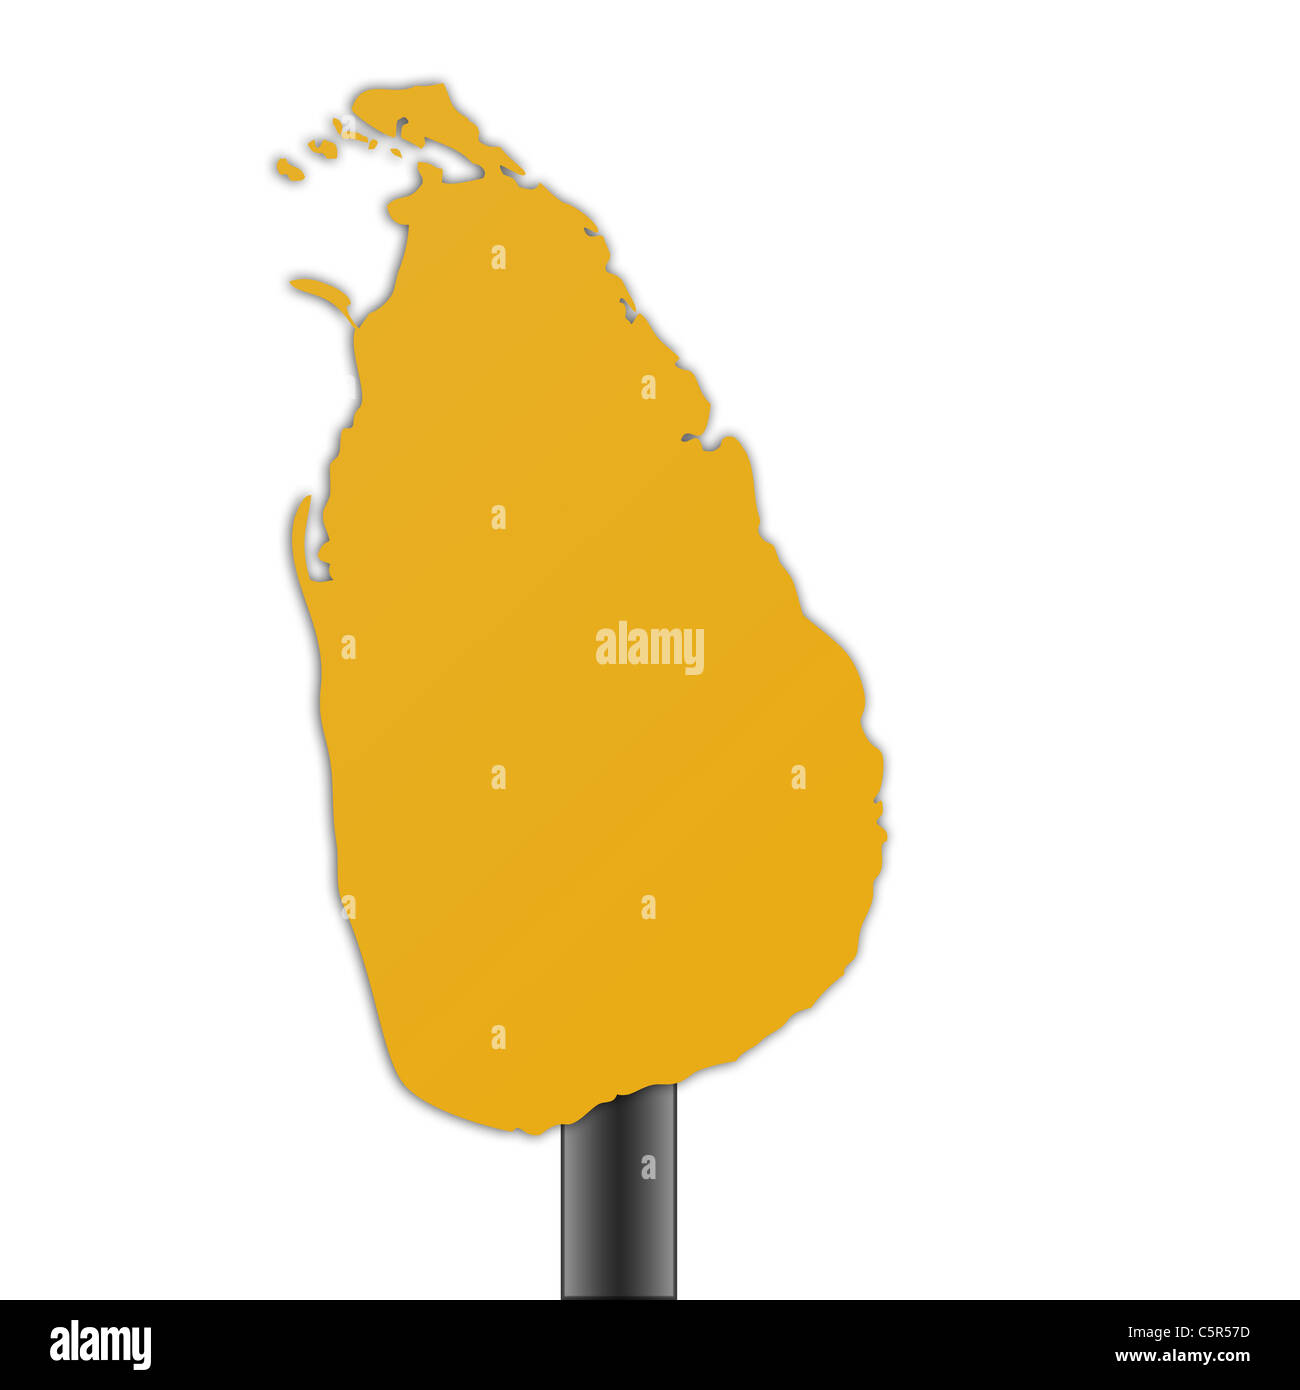 Sri Lanka map road sign isolated on a white background. Stock Photo